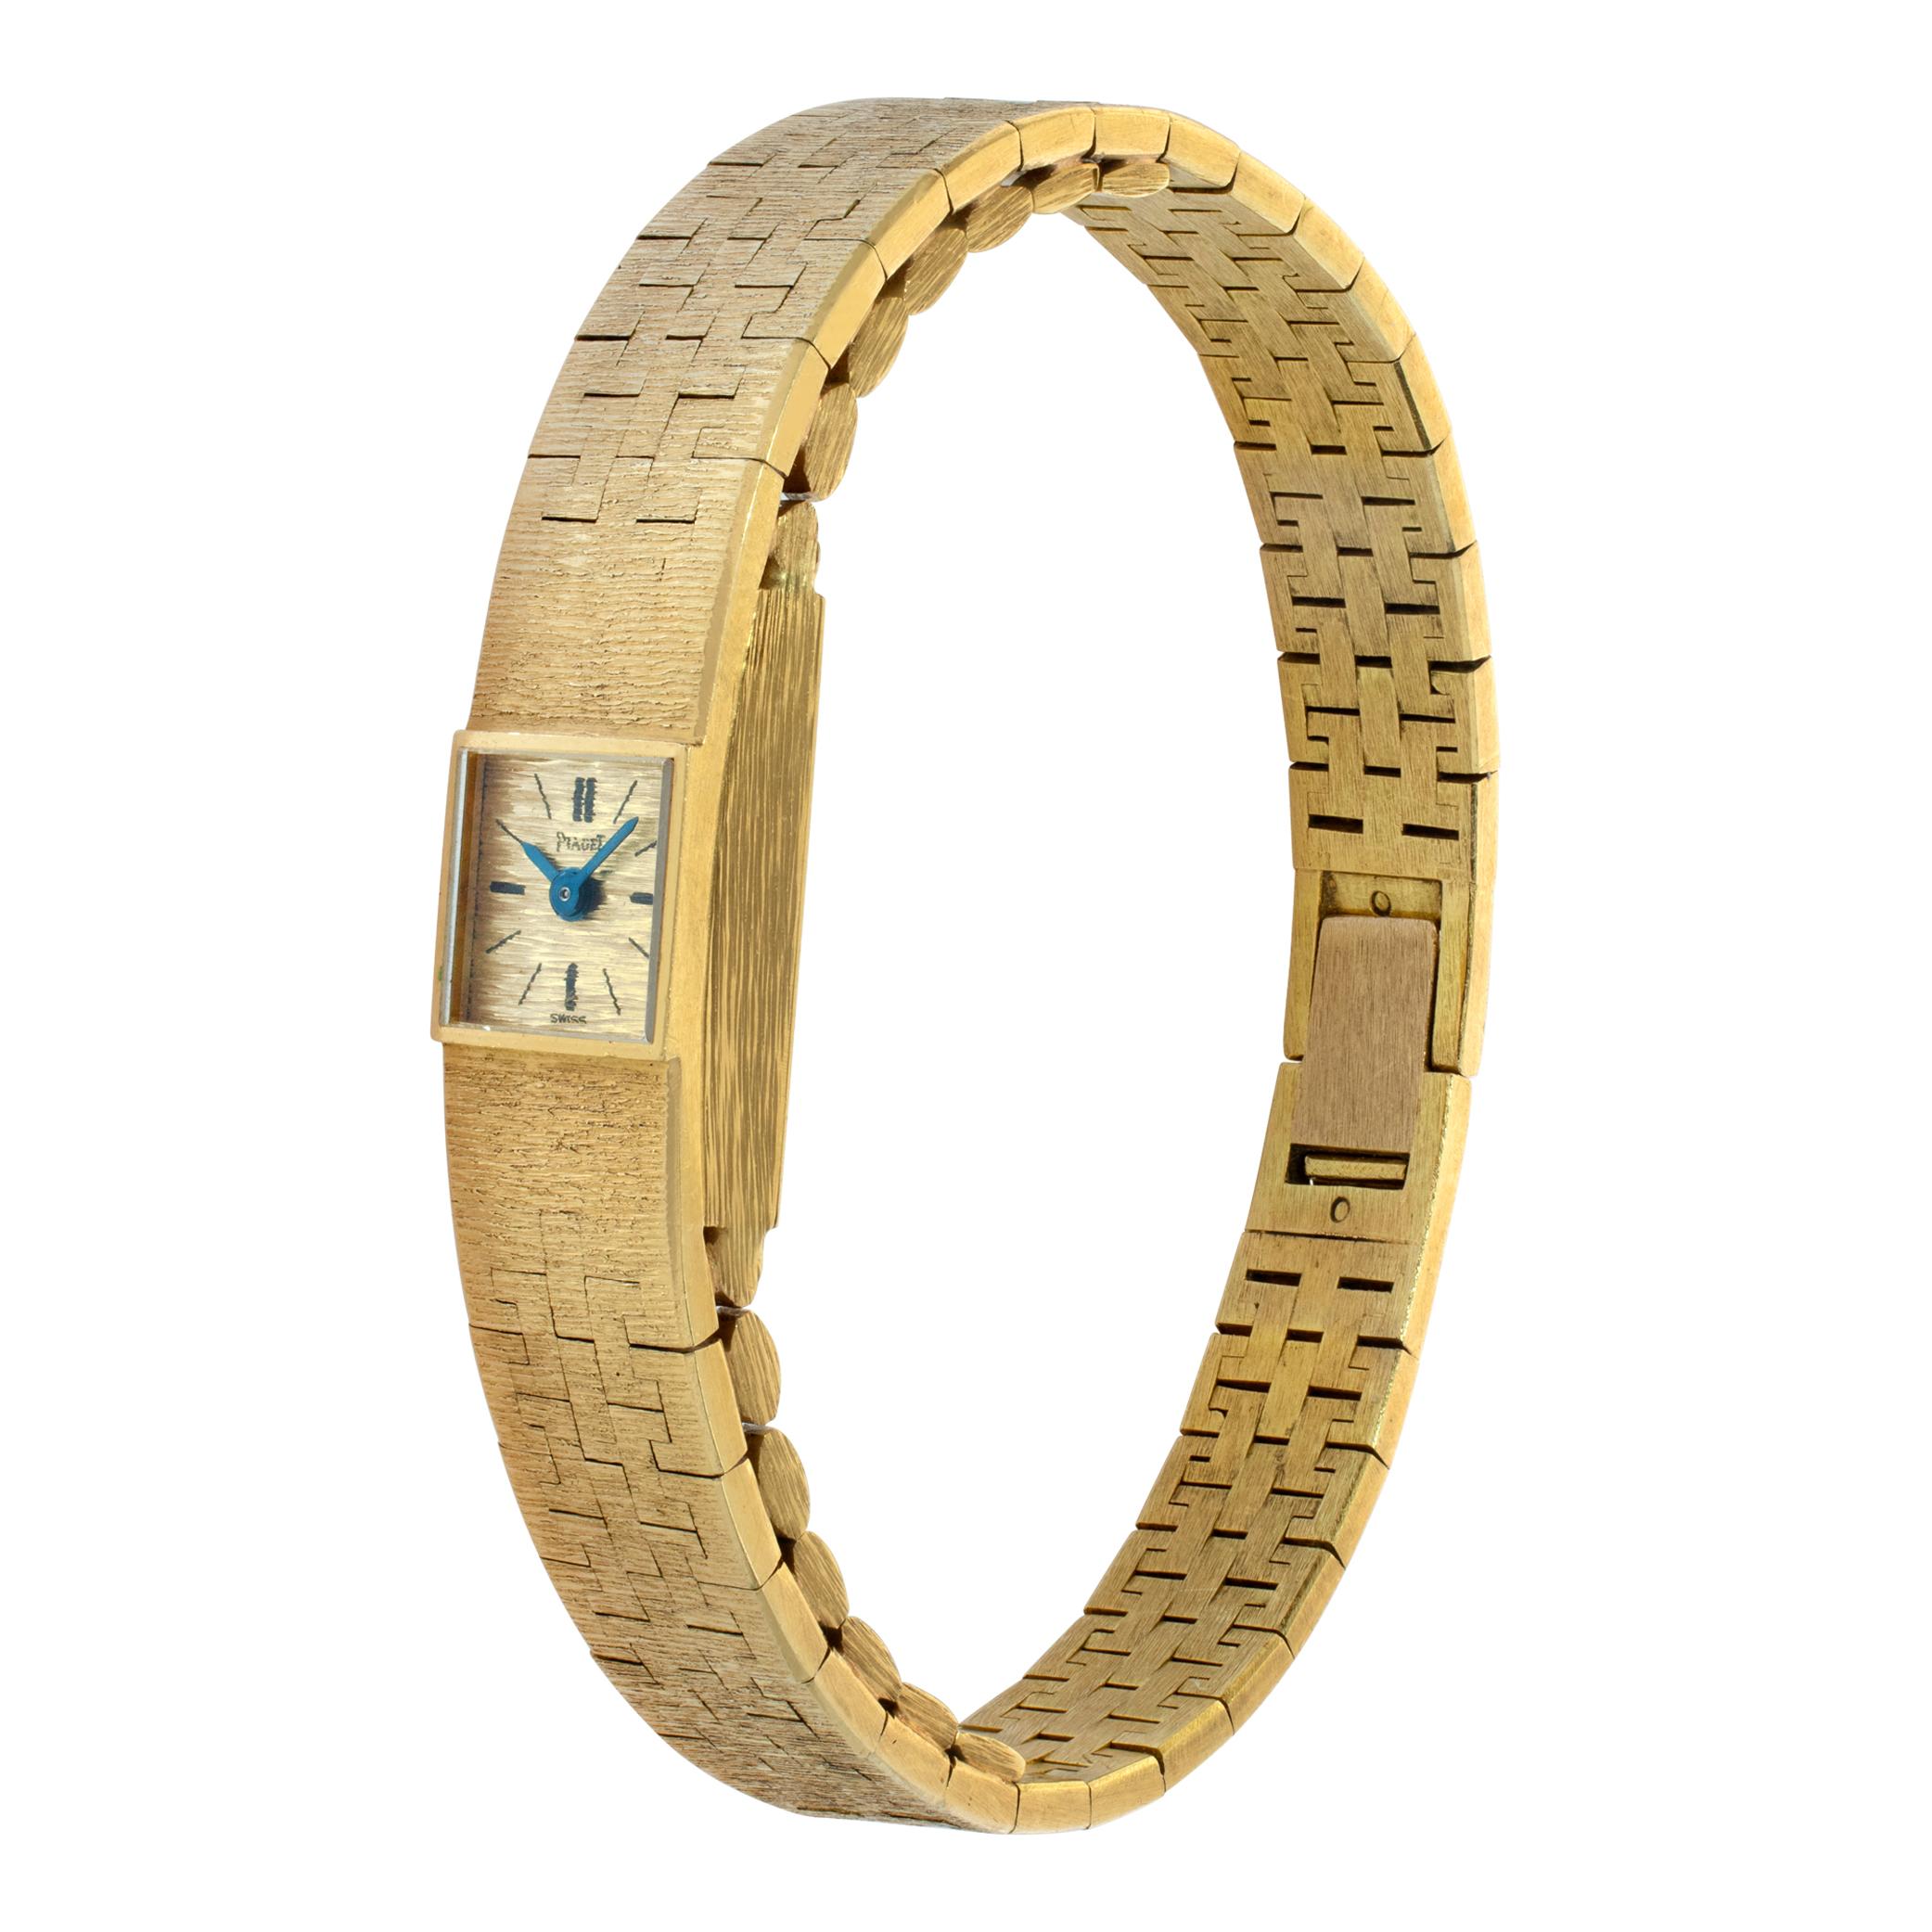 Piaget Classic in 18k yellow gold. Manual. 10 mm case size. Ref 1001 AG. 6 inch wrist size. Fine Pre-owned Piaget Watch.

 Certified preowned Classic Piaget Classic 1001 AG watch is made out of yellow gold on a 18k Yellow Gold bracelet with a 18k